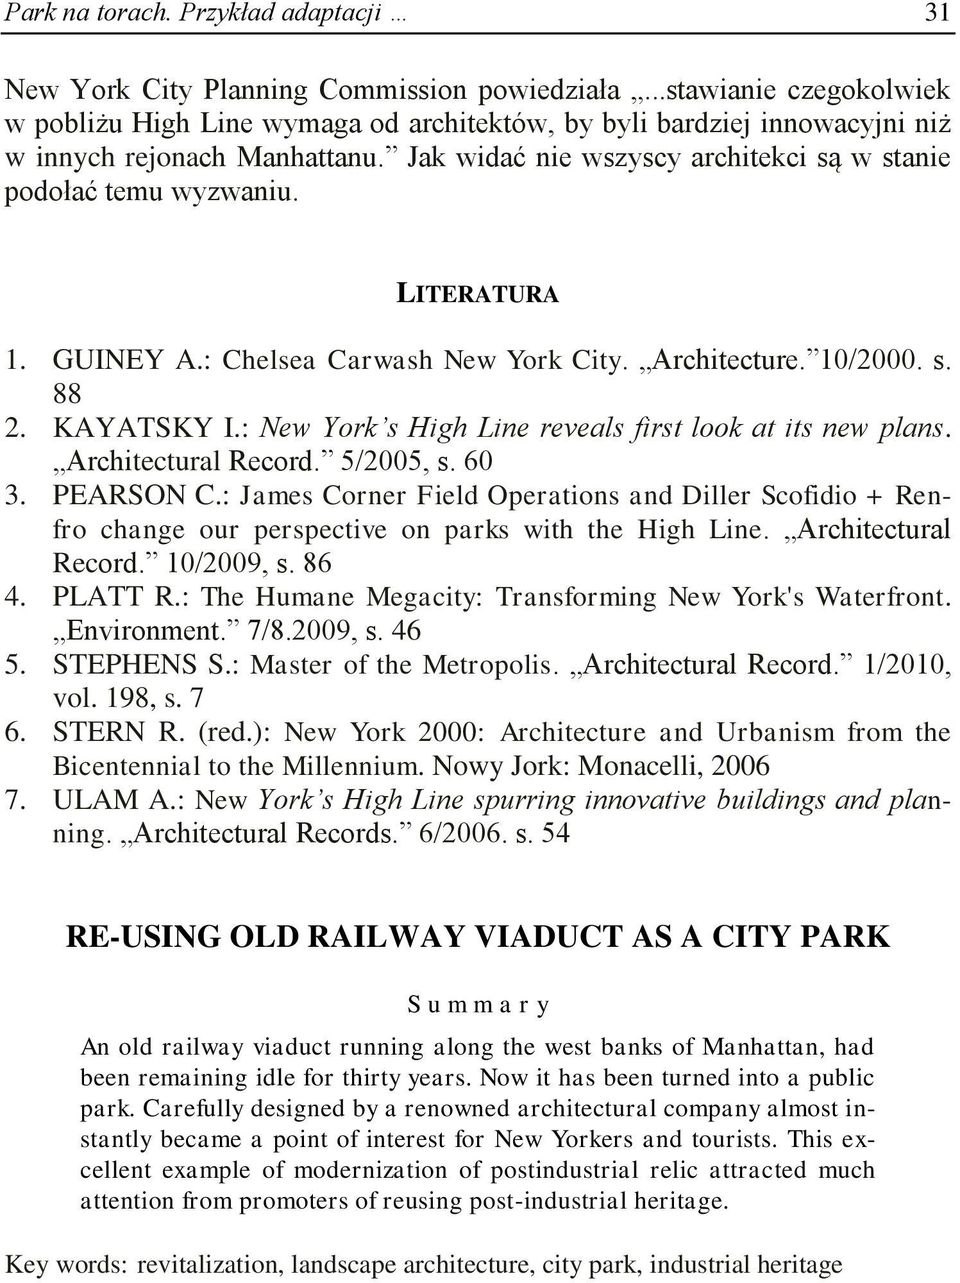 LITERATURA 1. GUINEY A.: Chelsea Carwash New York City. Architecture. 10/2000. s. 88 2. KAYATSKY I.: New York s High Line reveals first look at its new plans. Architectural Record. 5/2005, s. 60 3.